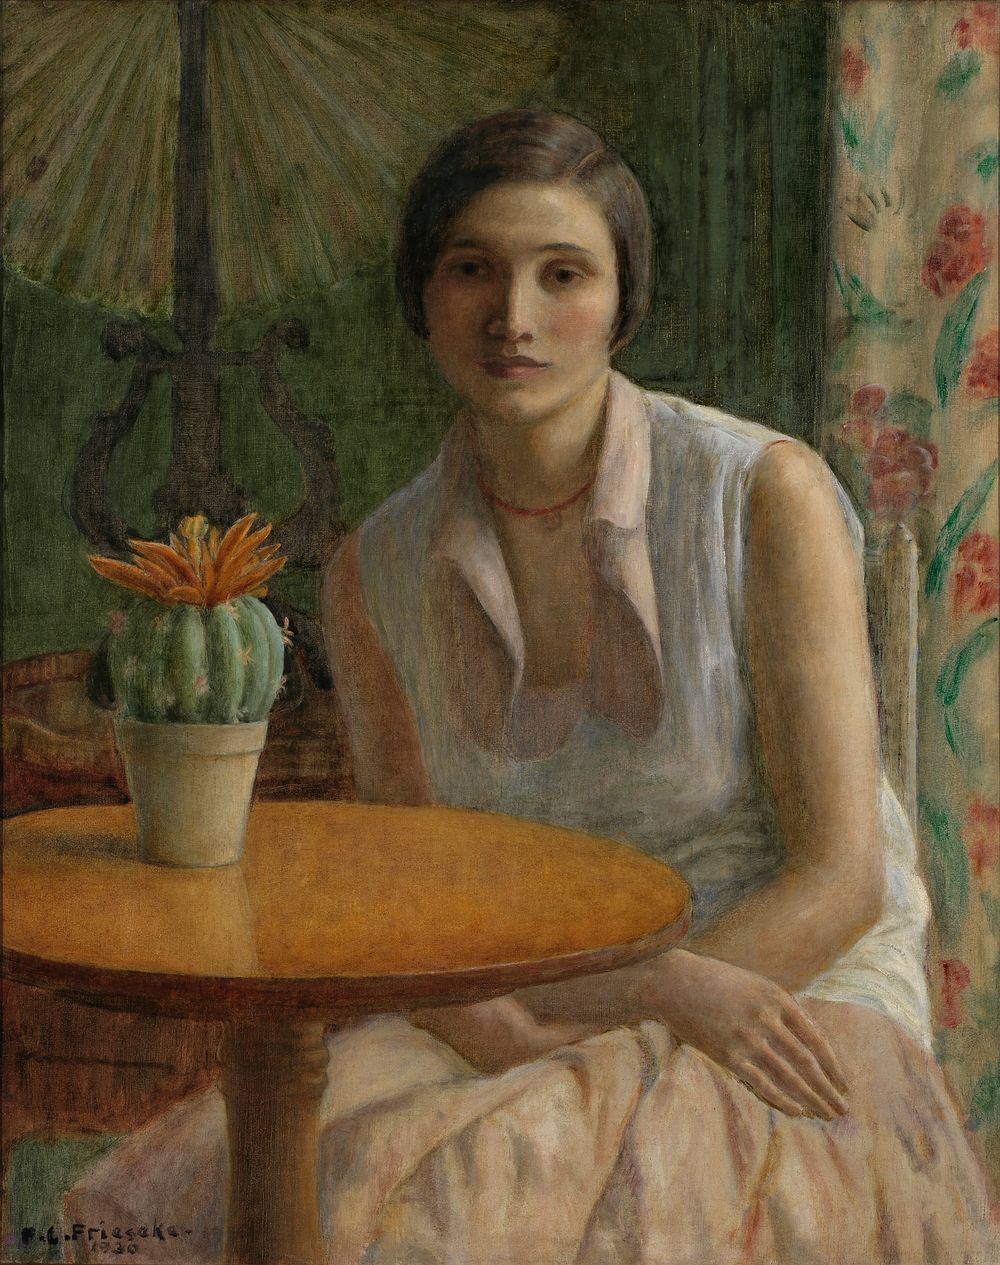 Portrait of a Woman (with Cactus), Frederick Carl Frieseke